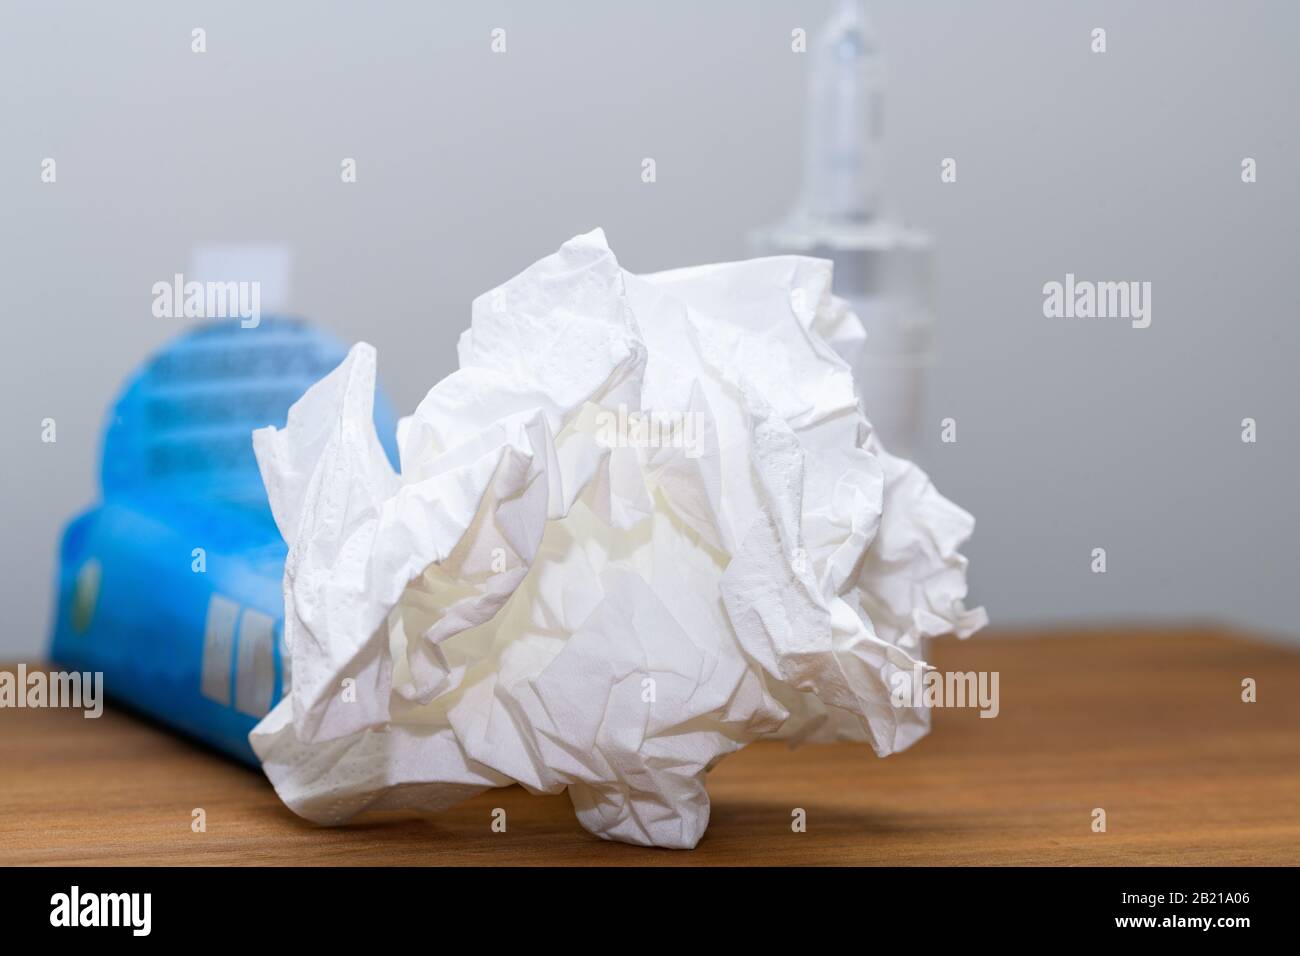 Close-up of paper tissue and nasal spray on a nightstand used during cold, flu or virus. Concept for medical conditions indoors at home. Stock Photo